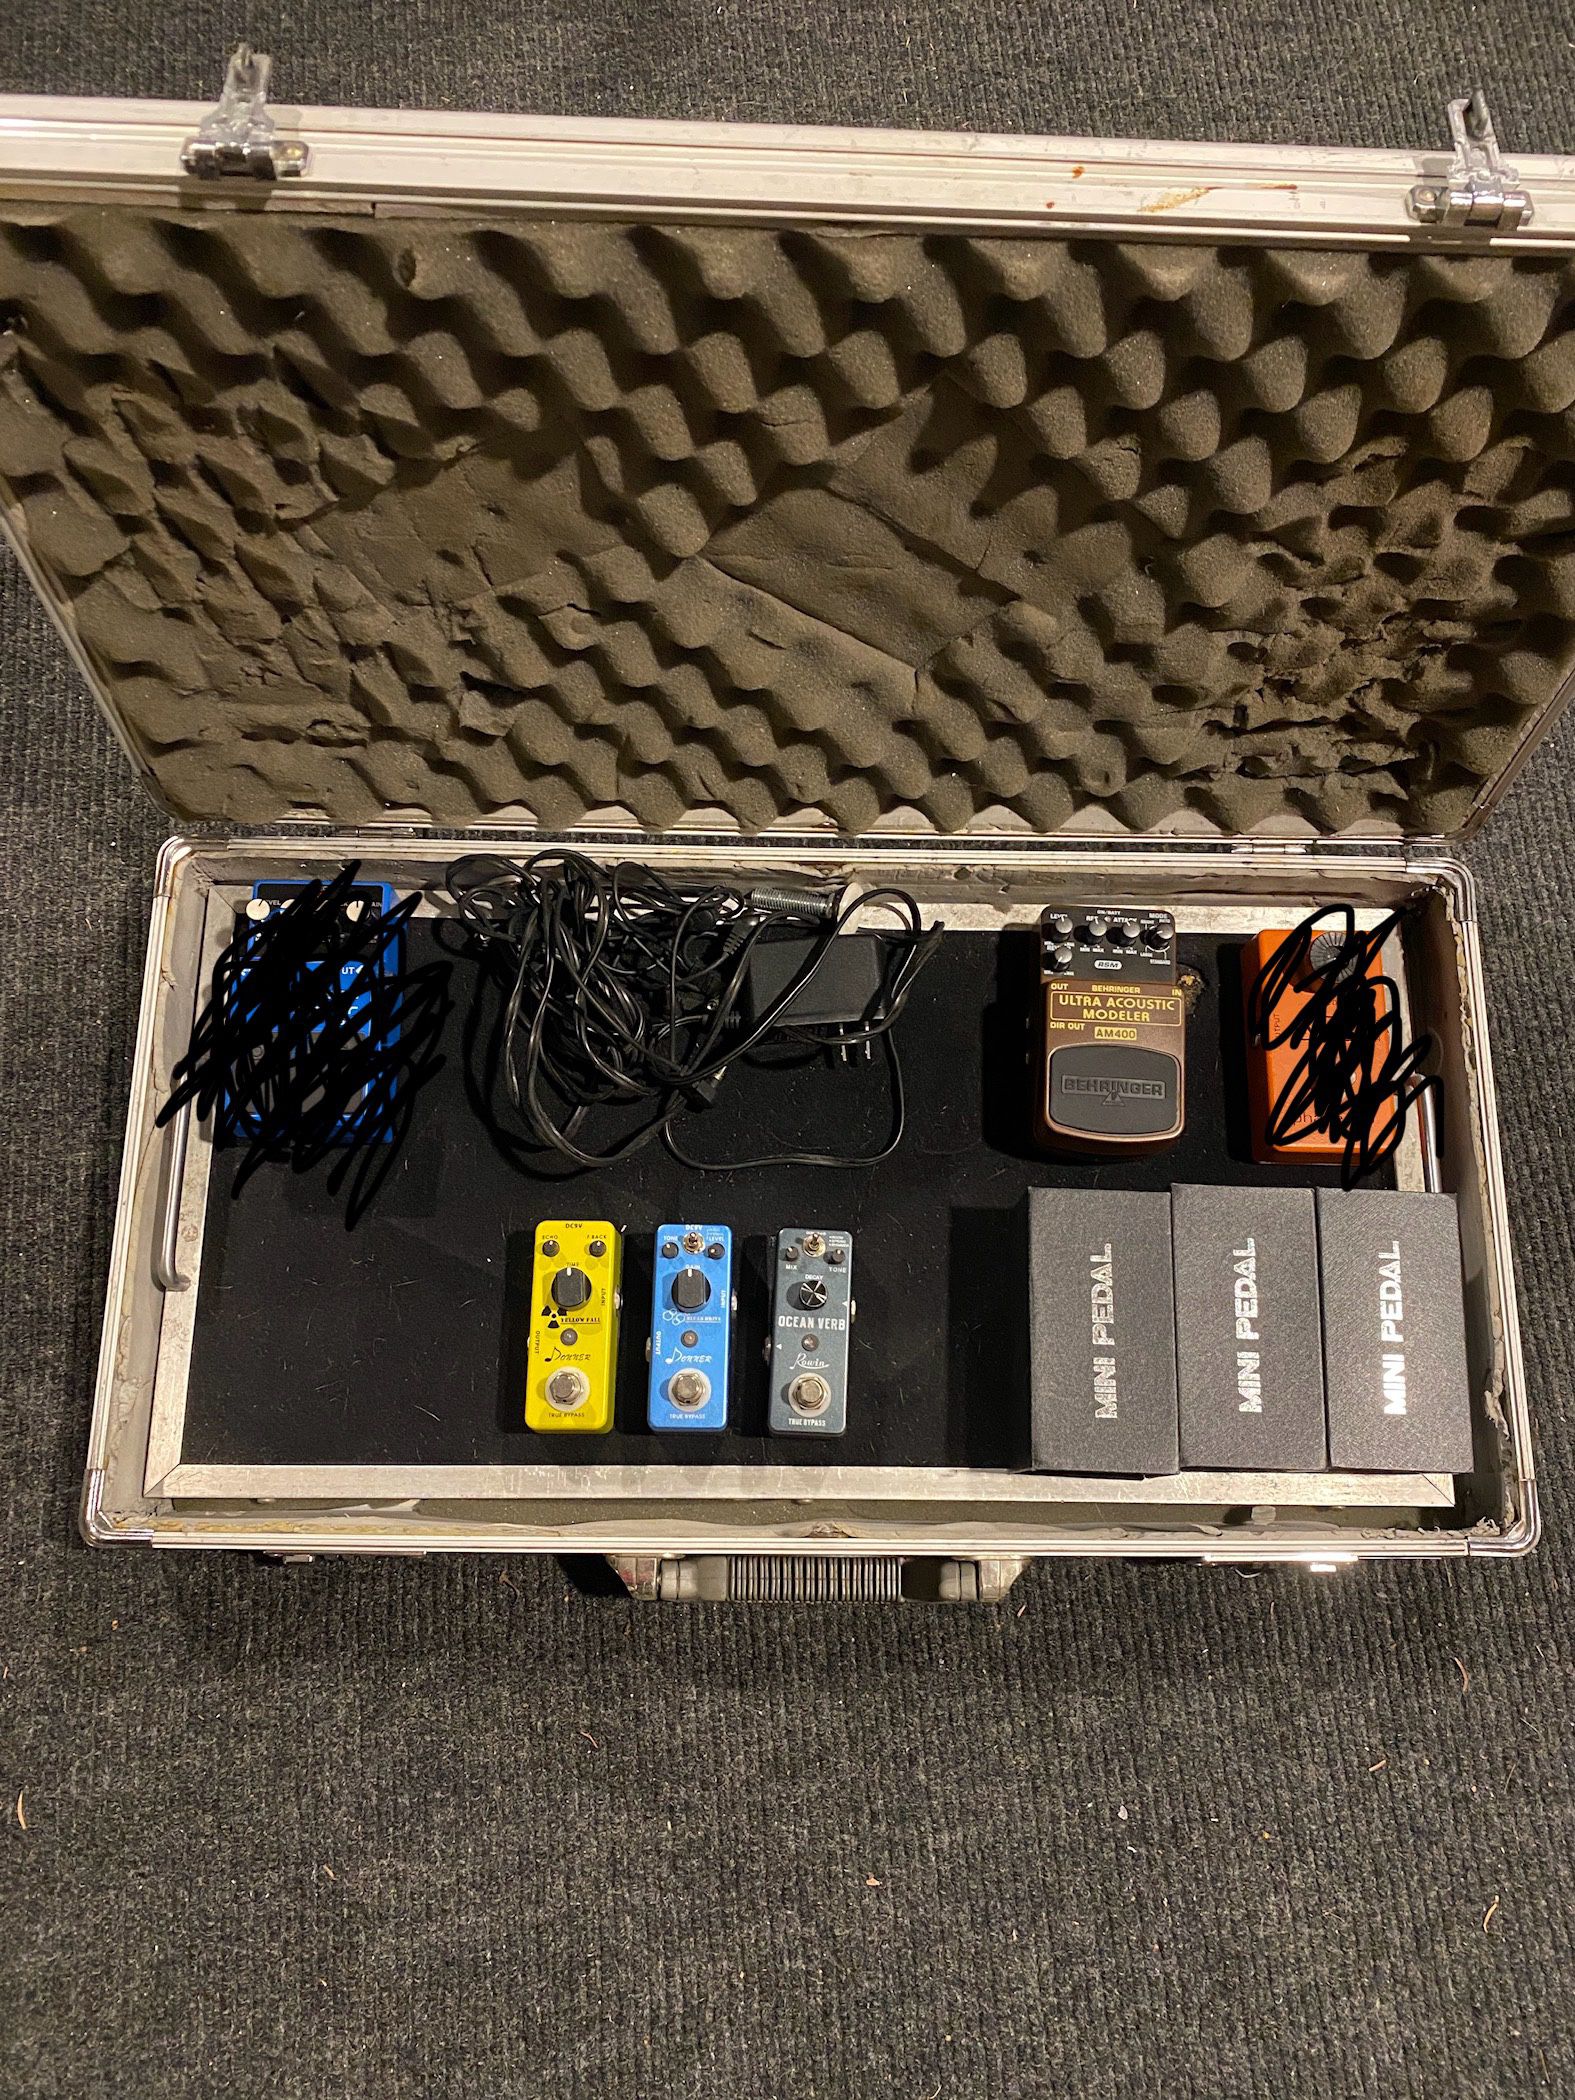 Pedalboard Complete - 4 Pedals, Power supply and Case